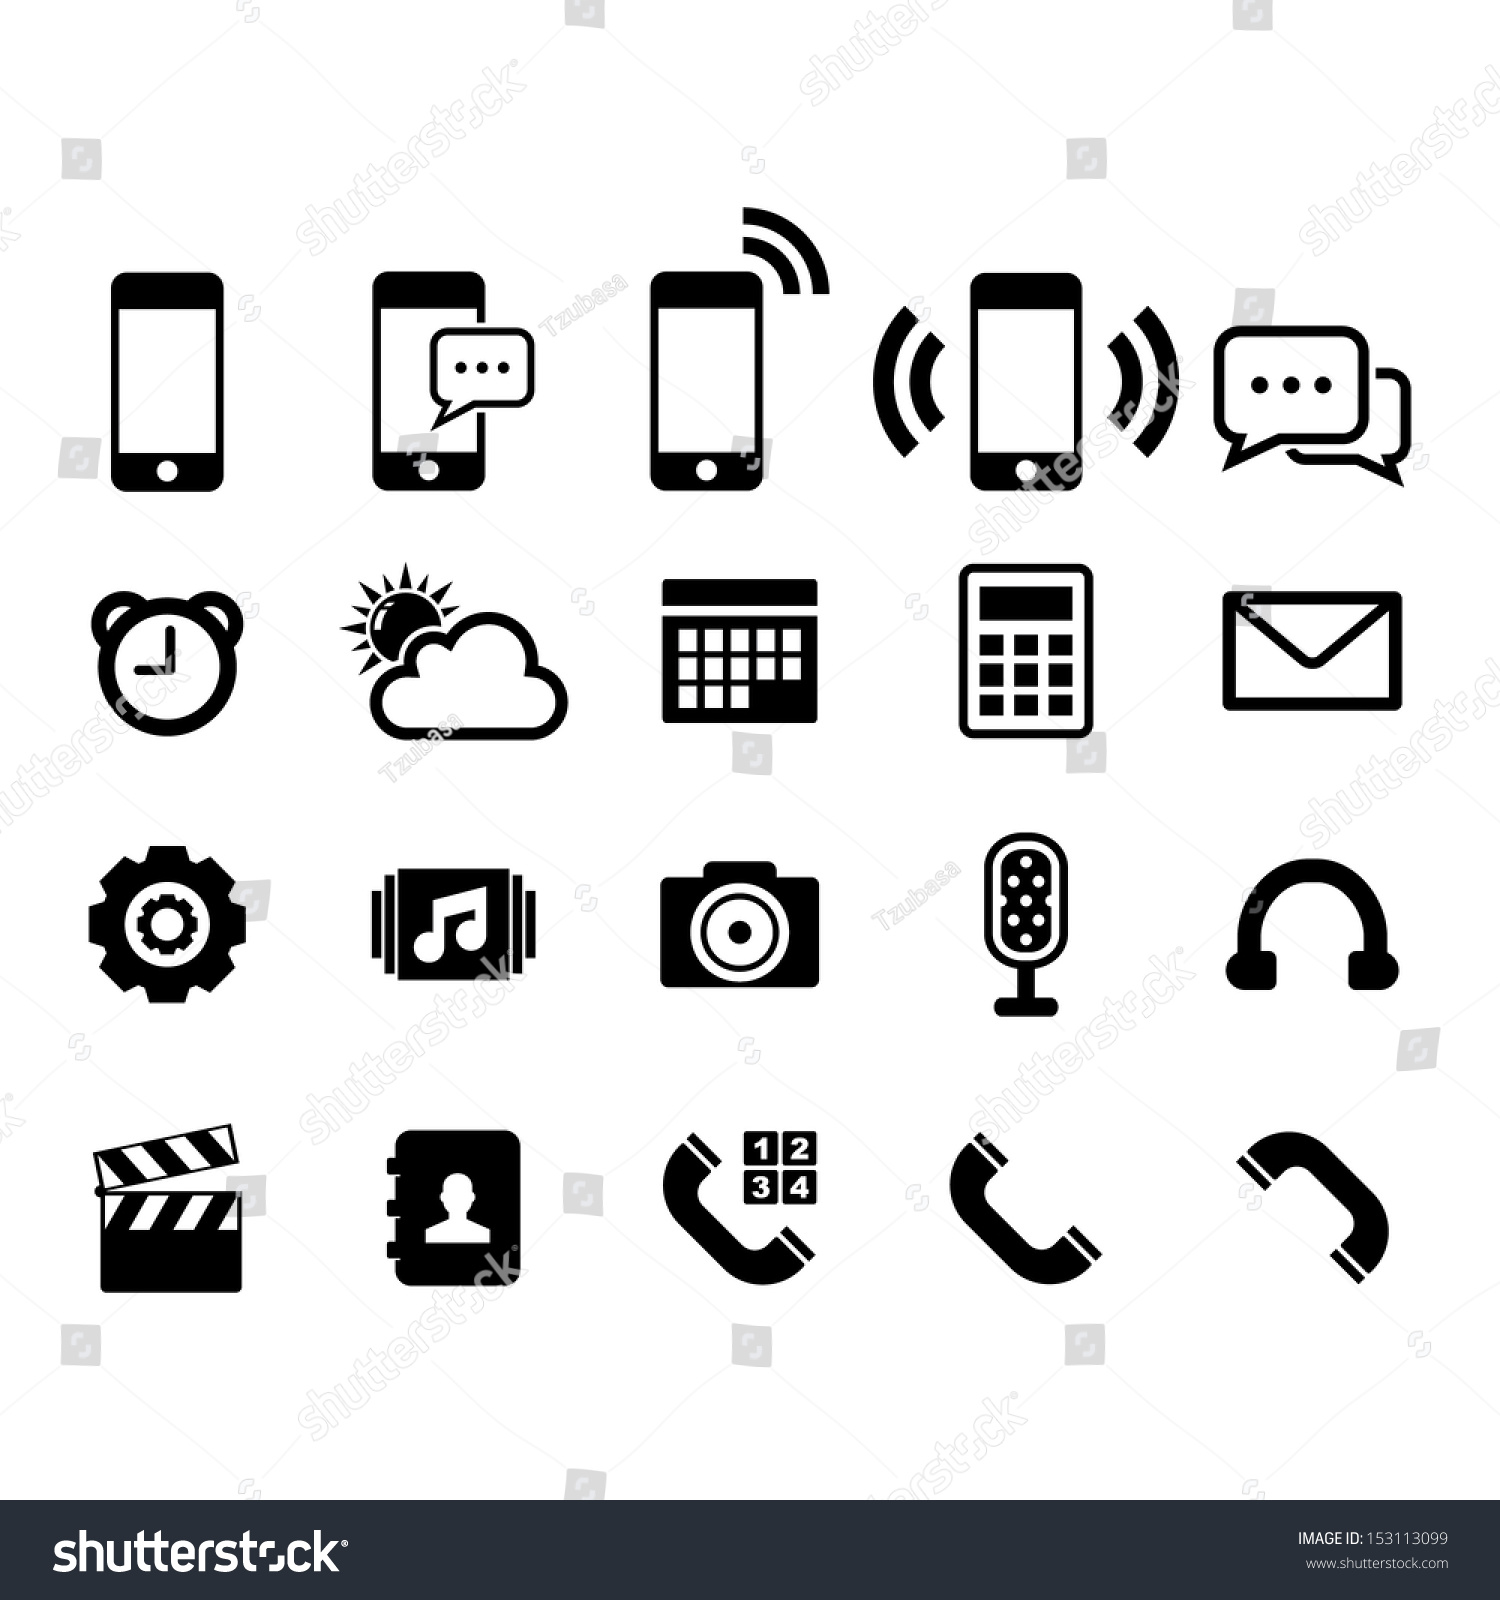 Cloud app icon on mobile phone icons set Vector Image